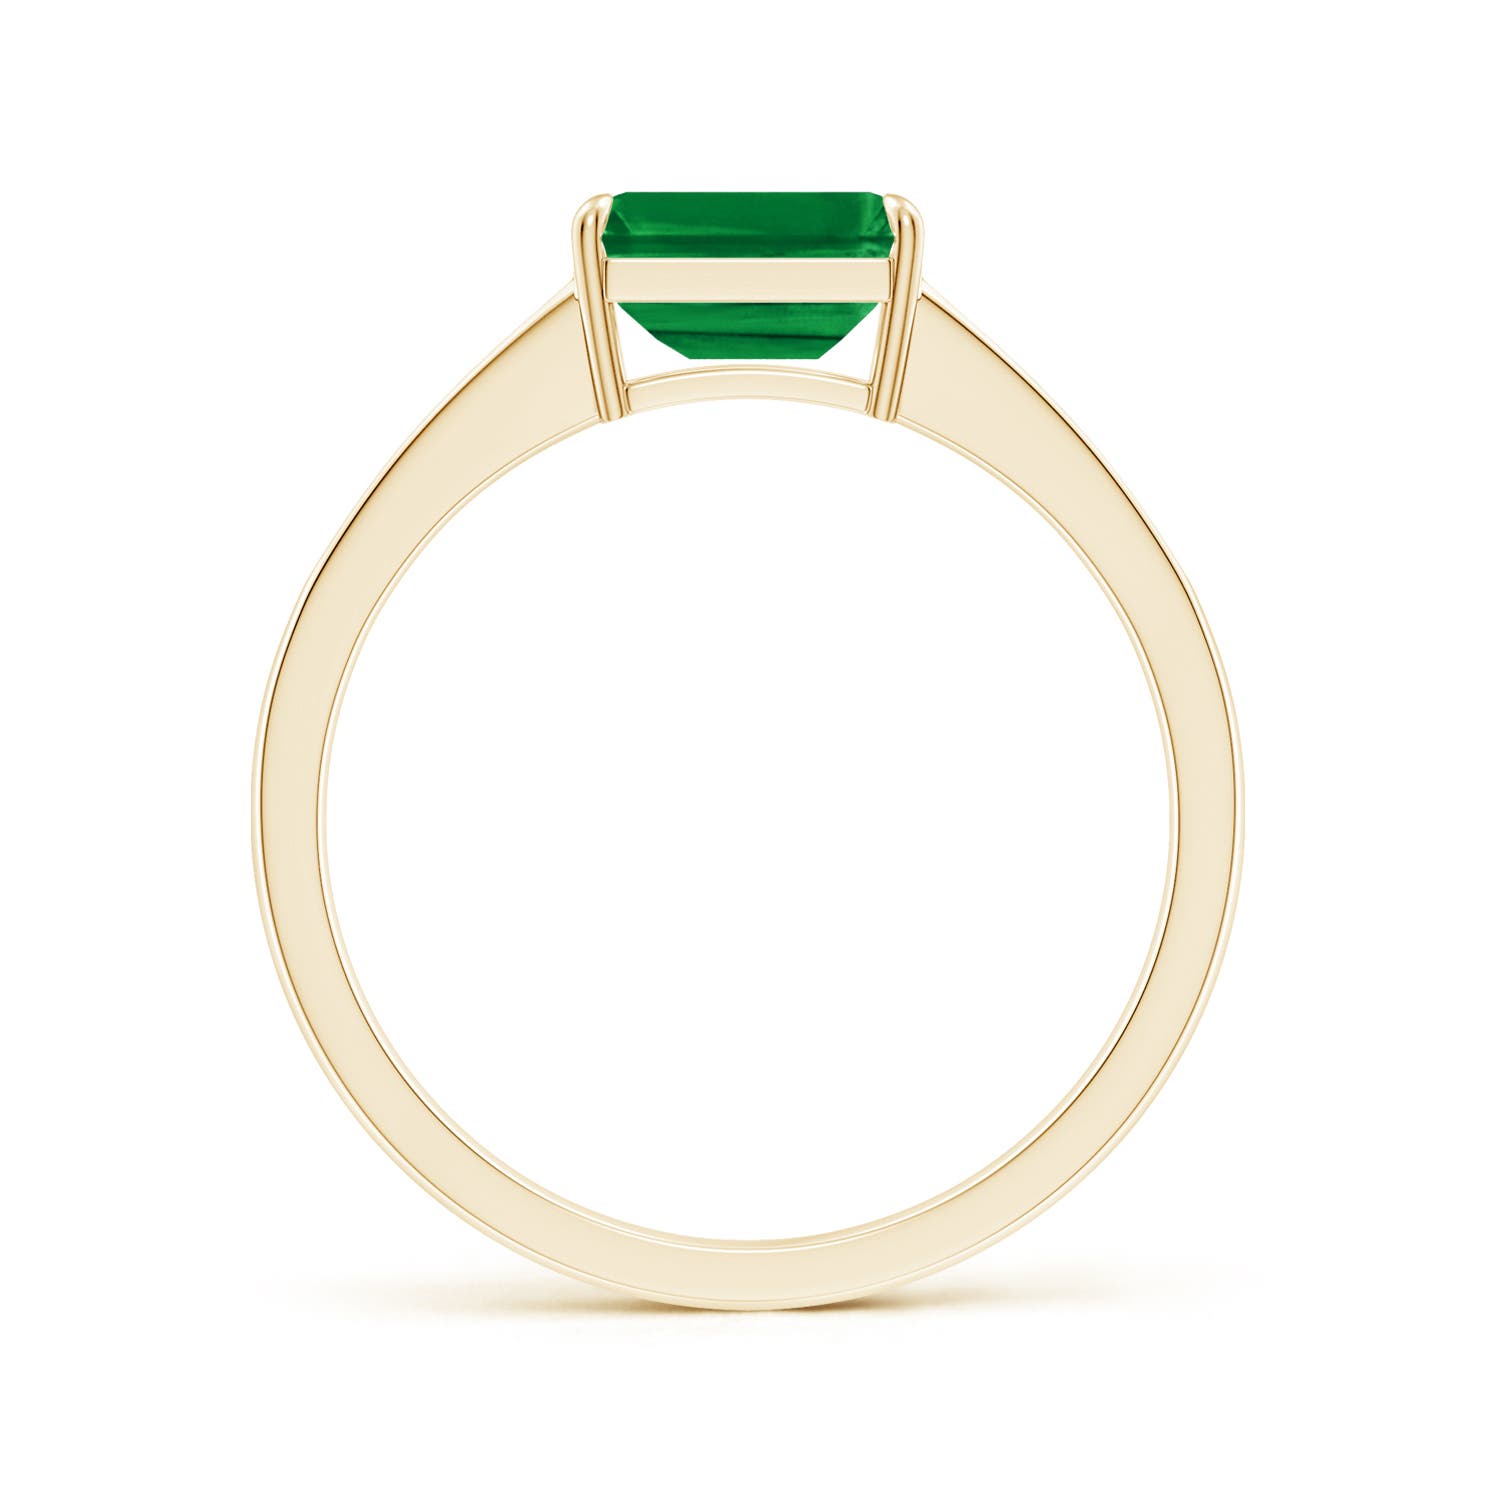 AAA - Emerald / 1.18 CT / 14 KT Yellow Gold